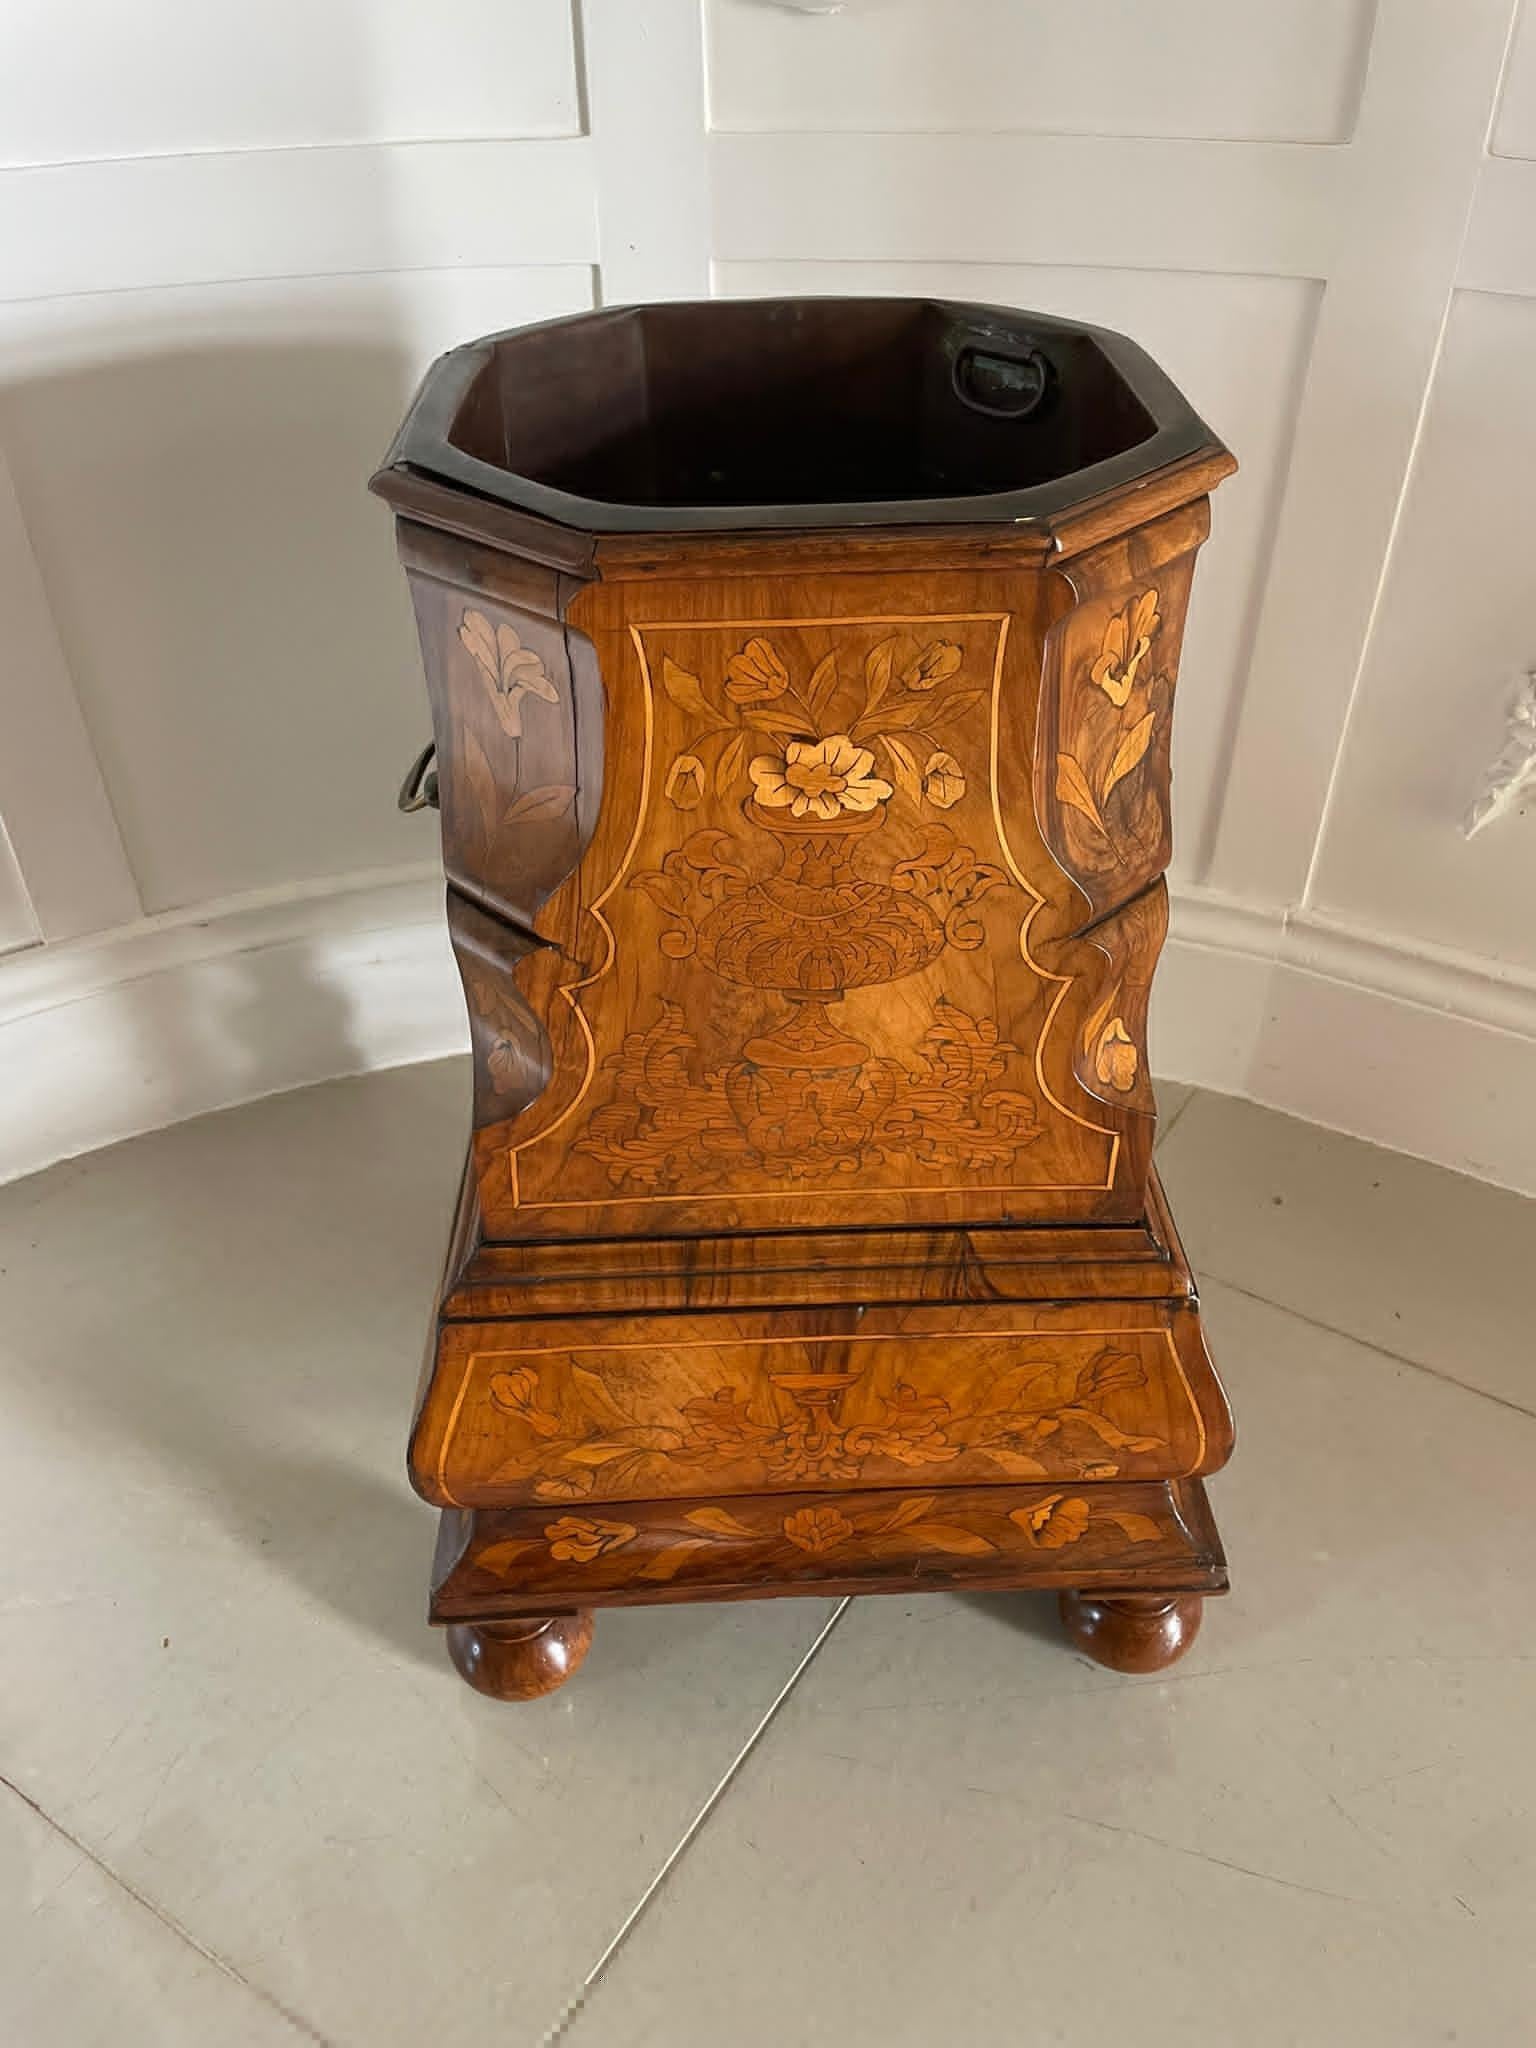 English Antique Quality Floral Marquetry Burr Walnut Freestanding Champagne/Wine Cooler For Sale